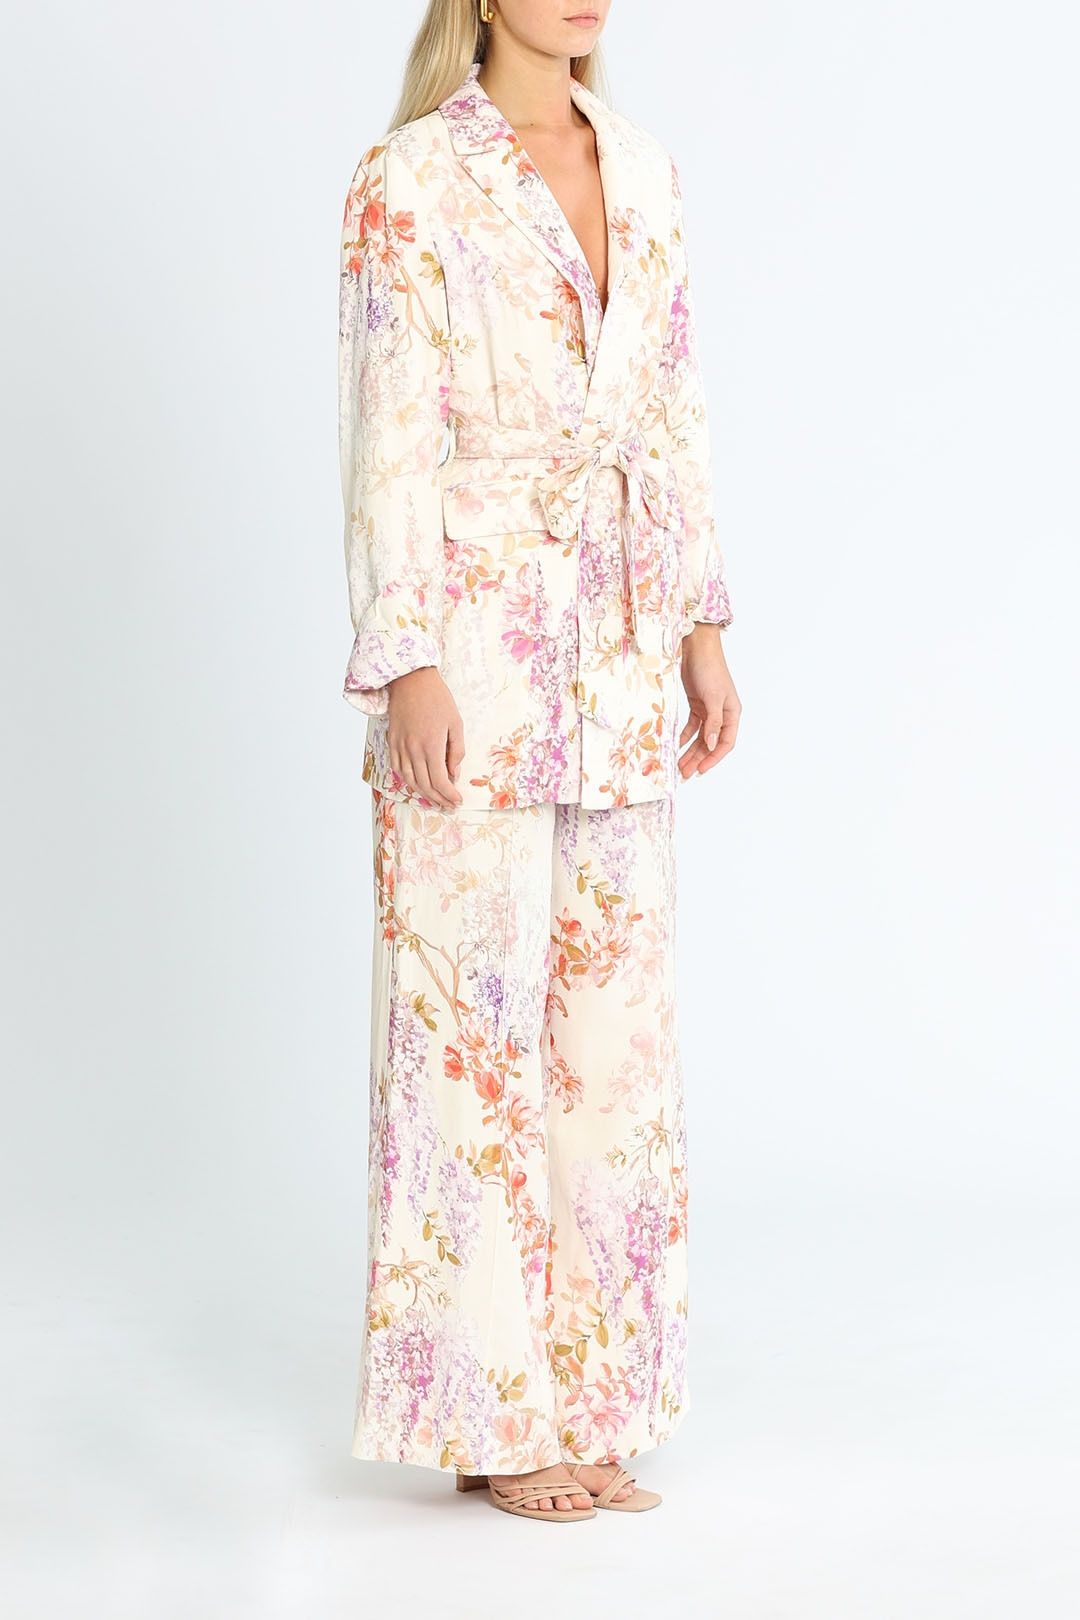 Ministry of Style Joyful Blooms Blazer and Pant Set Floral